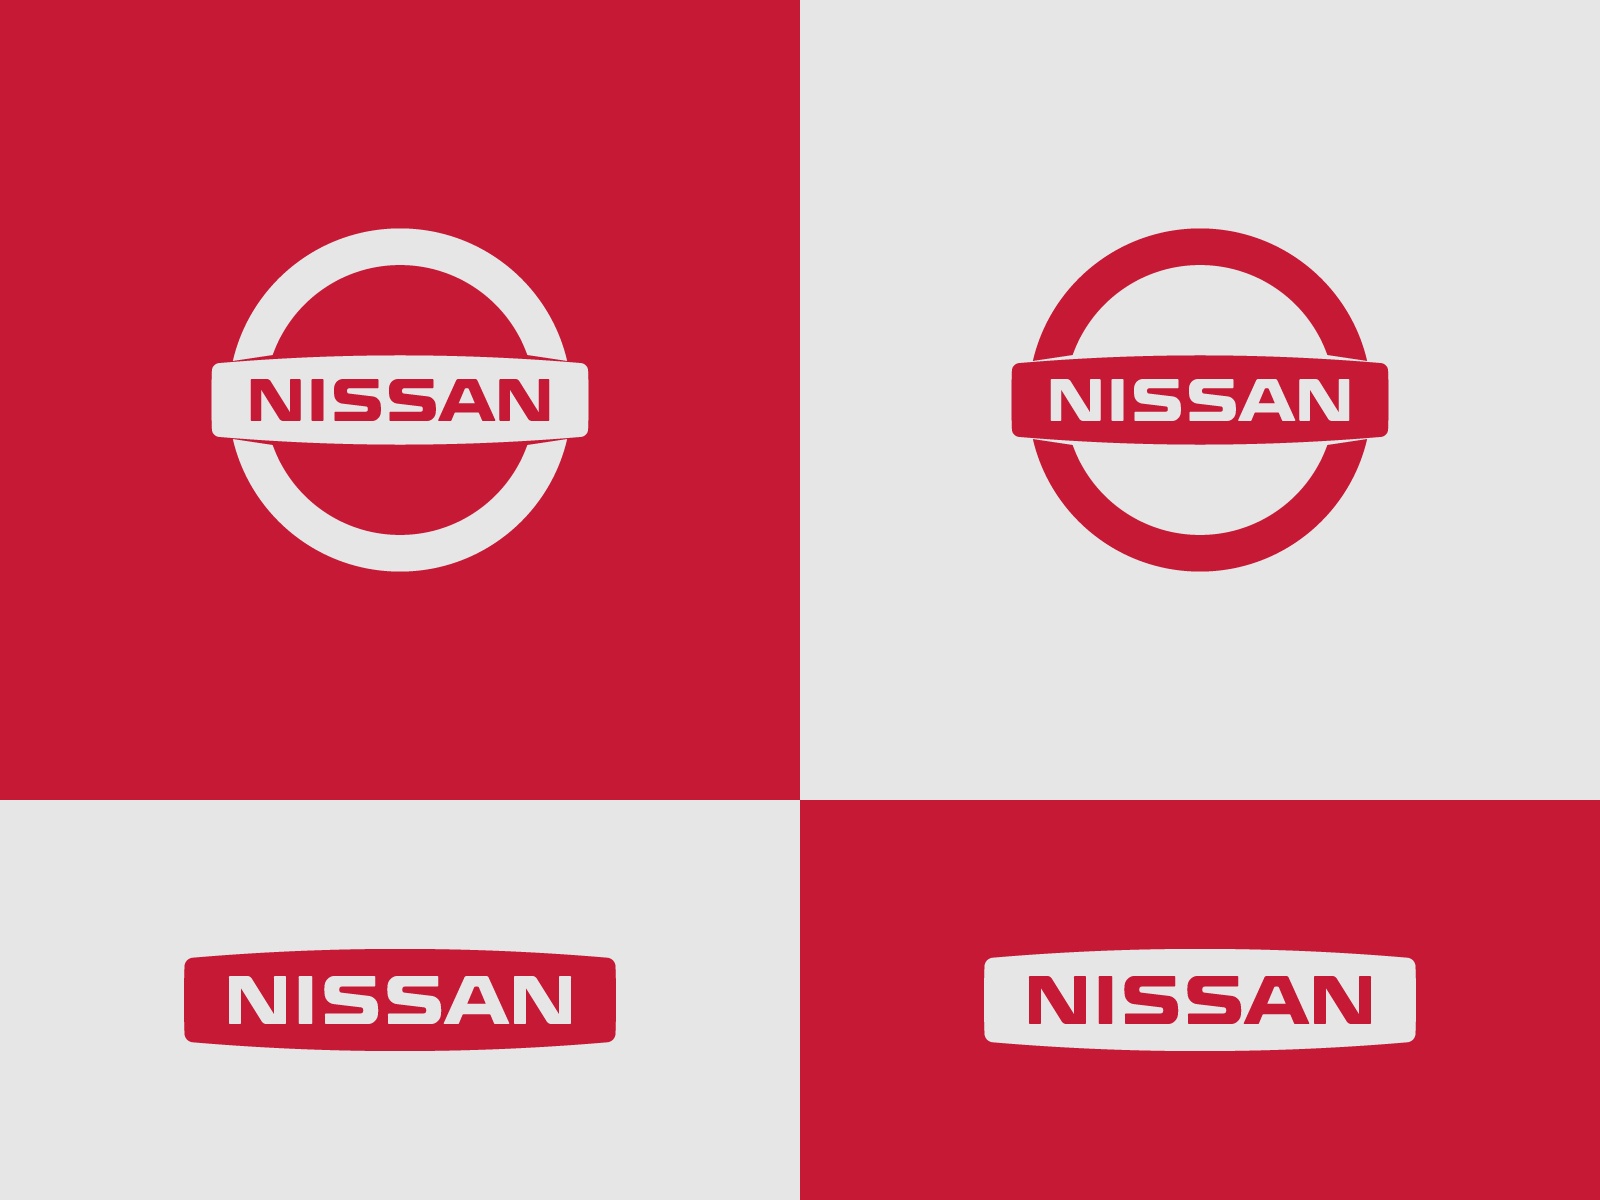 Nissan - flat design proposal by Helvetiphant™ on Dribbble